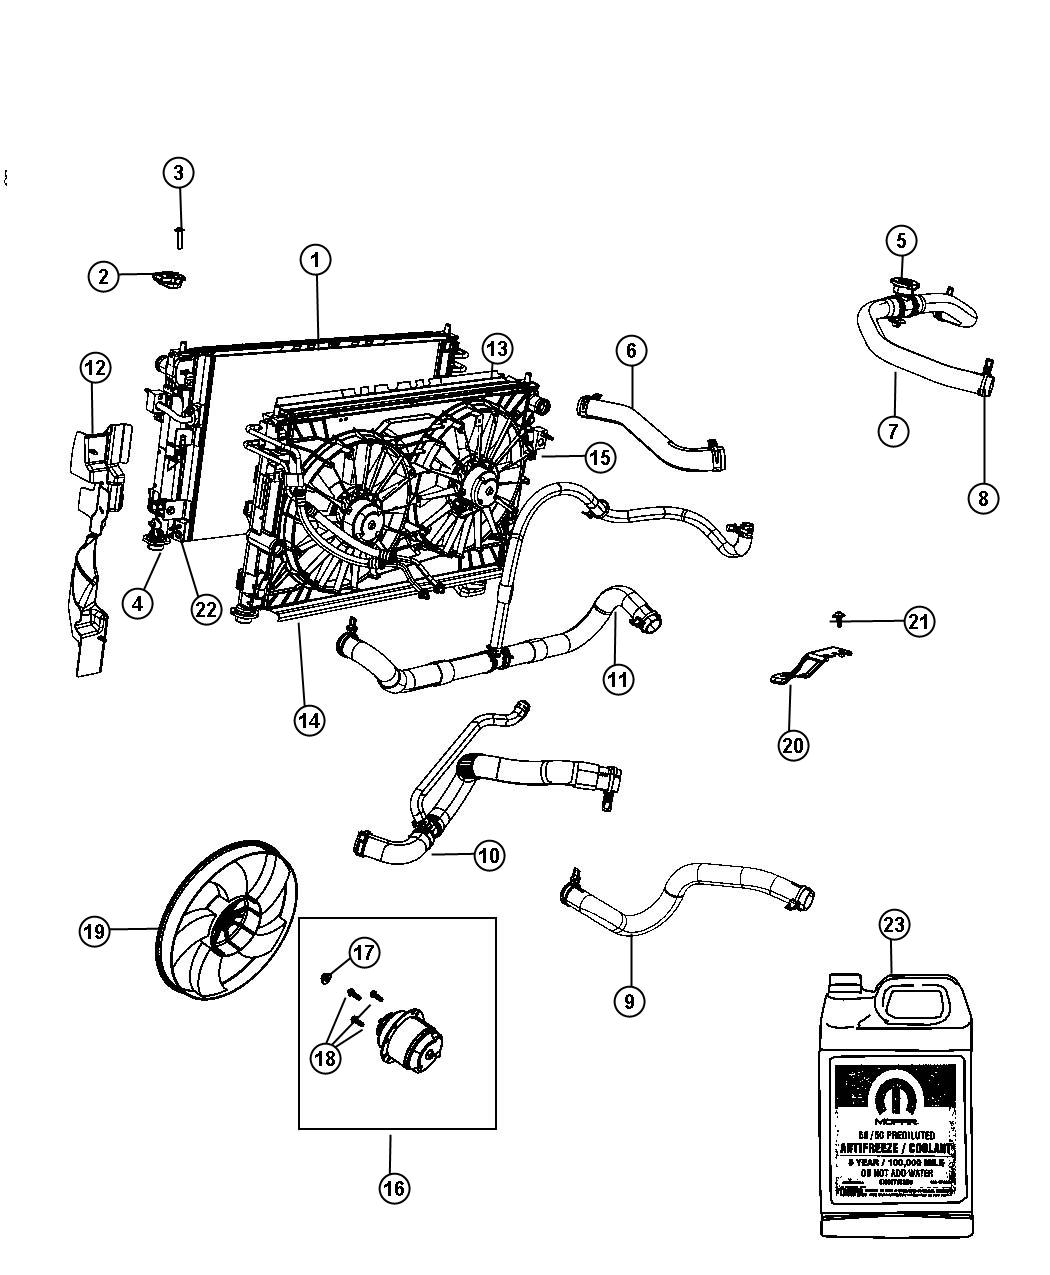 Radiator and Related Parts. Diagram